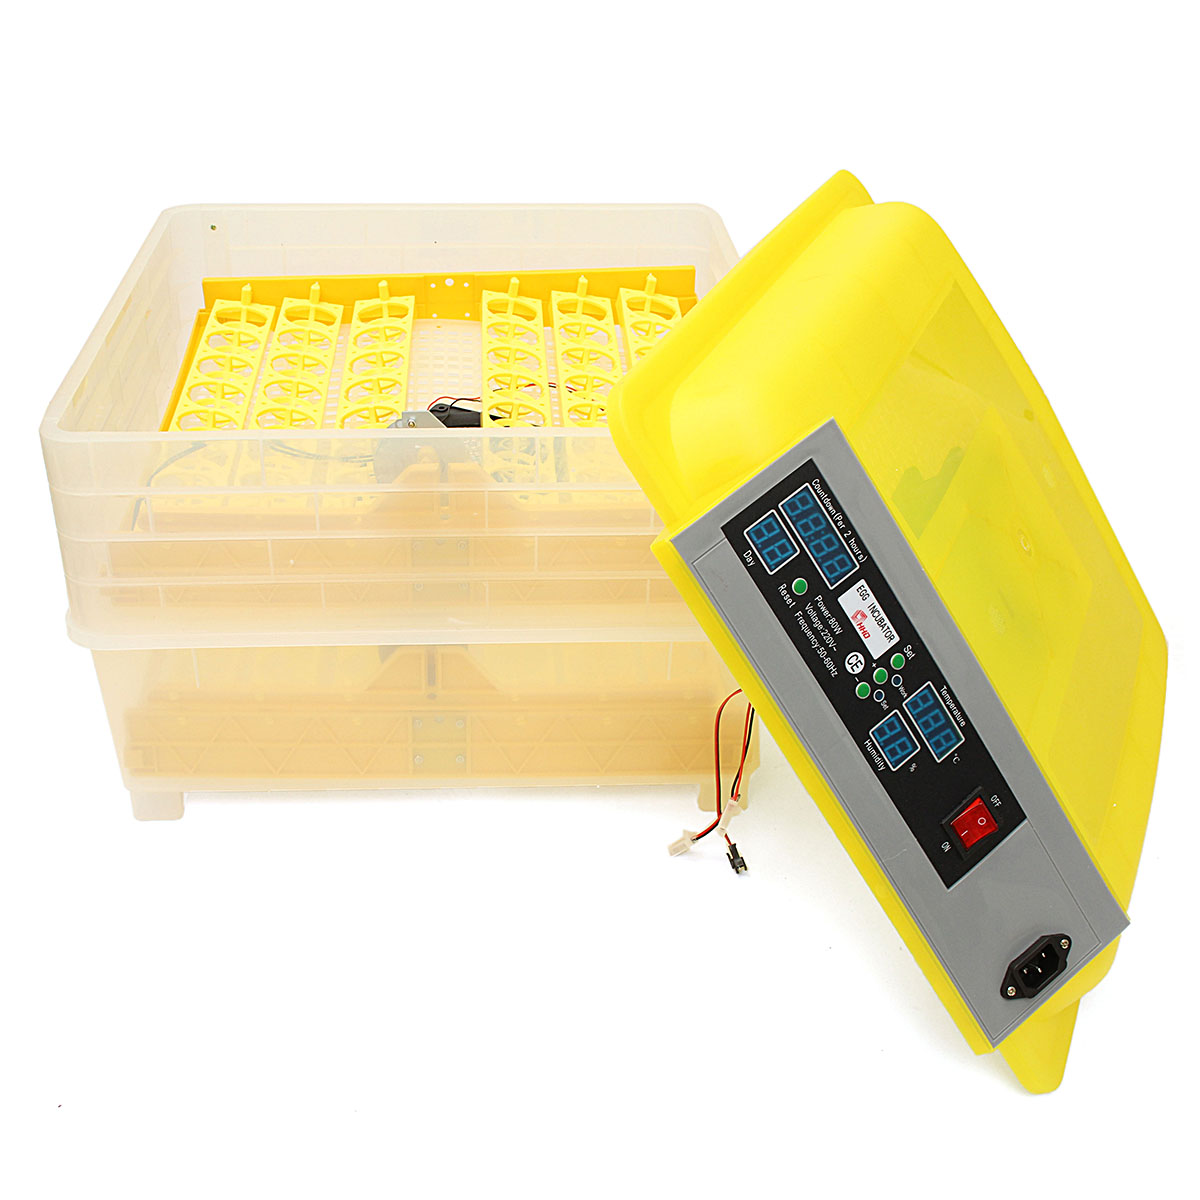 Fully-Automatic-Digital-Egg-Incubator-96-Eggs-Poultry-Duck-Hatcher-DT-110V-80W-1657249-3